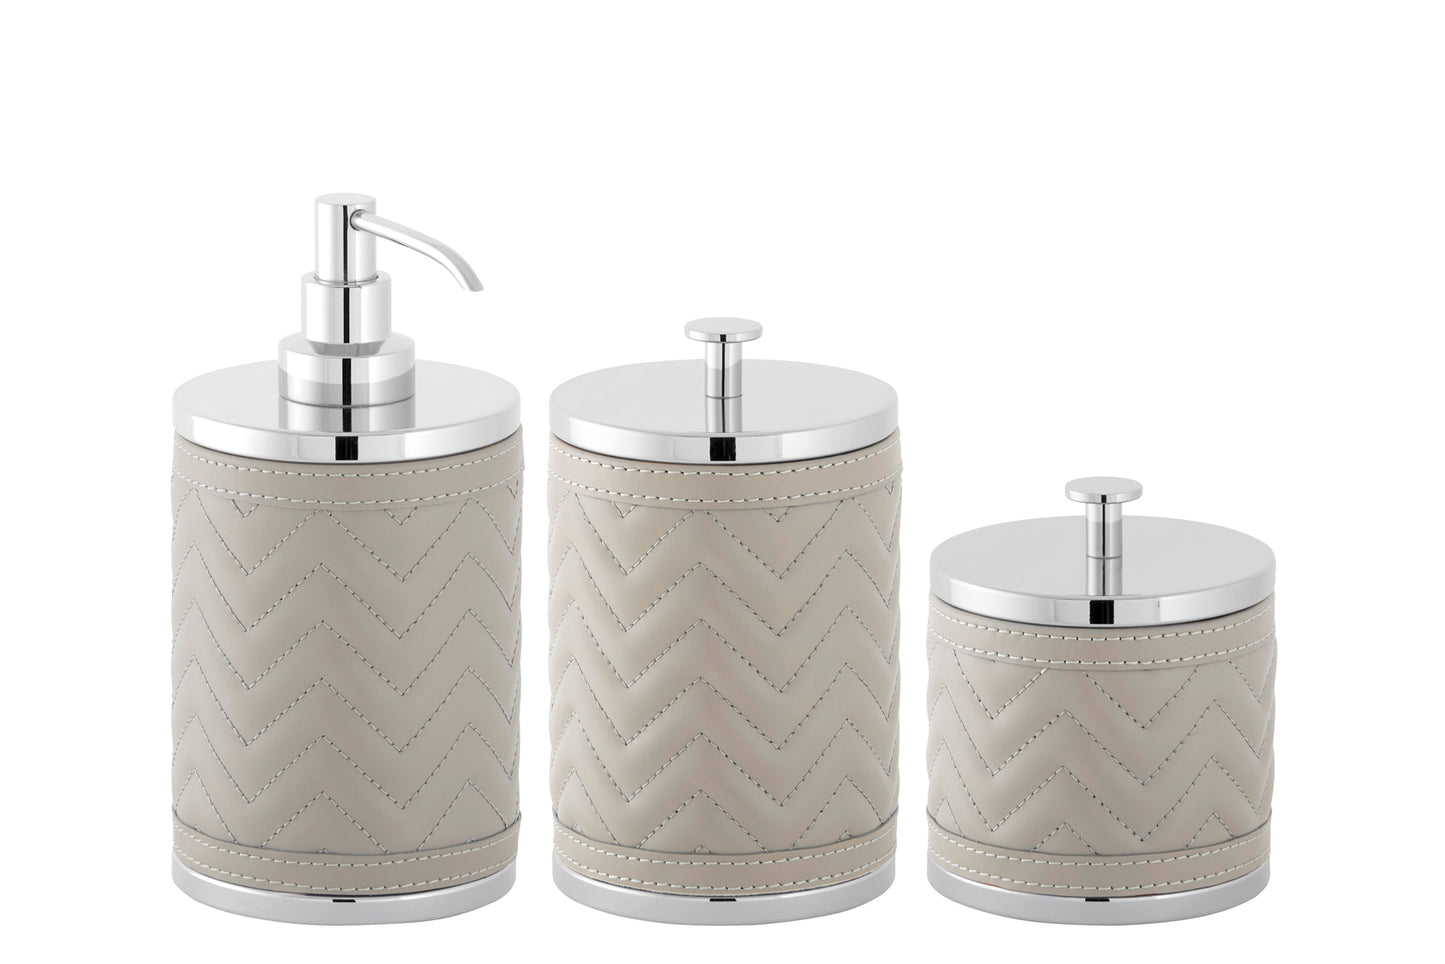 Riviere Alghero Quilted Herringbone Leather Soap Dispenser | Covered with Quilted Herringbone Padded Leather | Features Chrome or Gold Metal Finish | Adds Elegance to Bathrooms